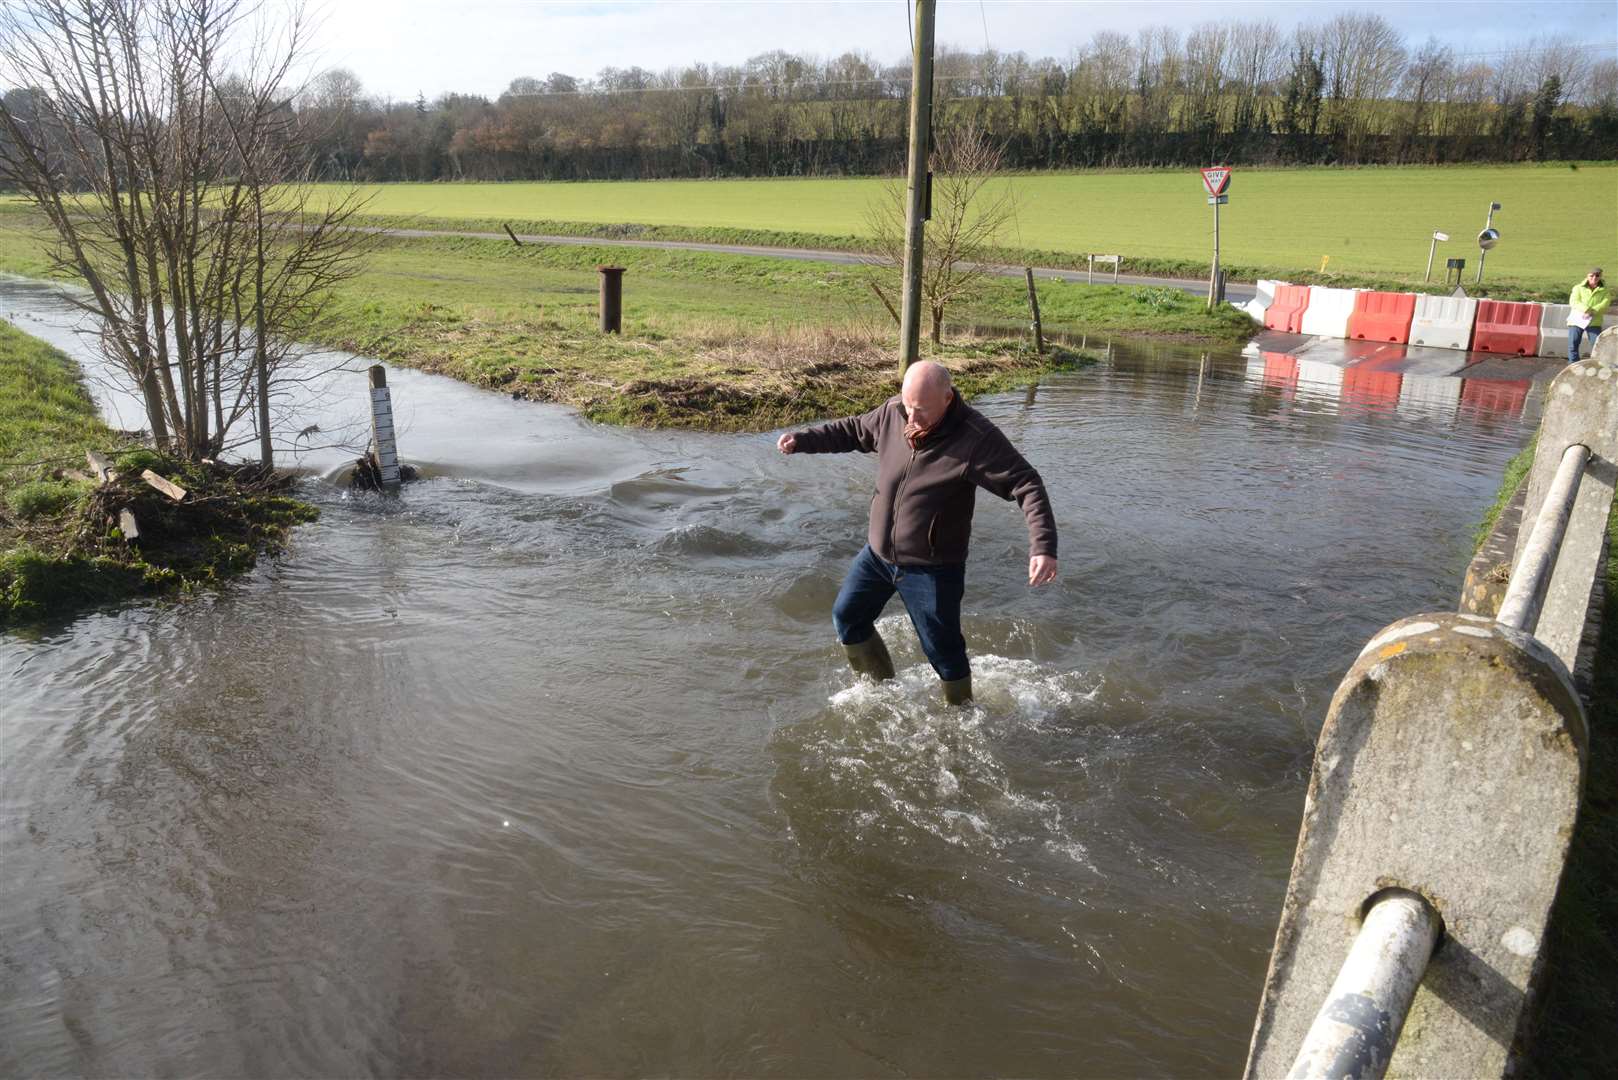 Cllr Mike Sole at the junction of Out Elmstead Lane and Valley Road, Barham, which has been flooded by the Nailbourne river. Picture: Chris Davey